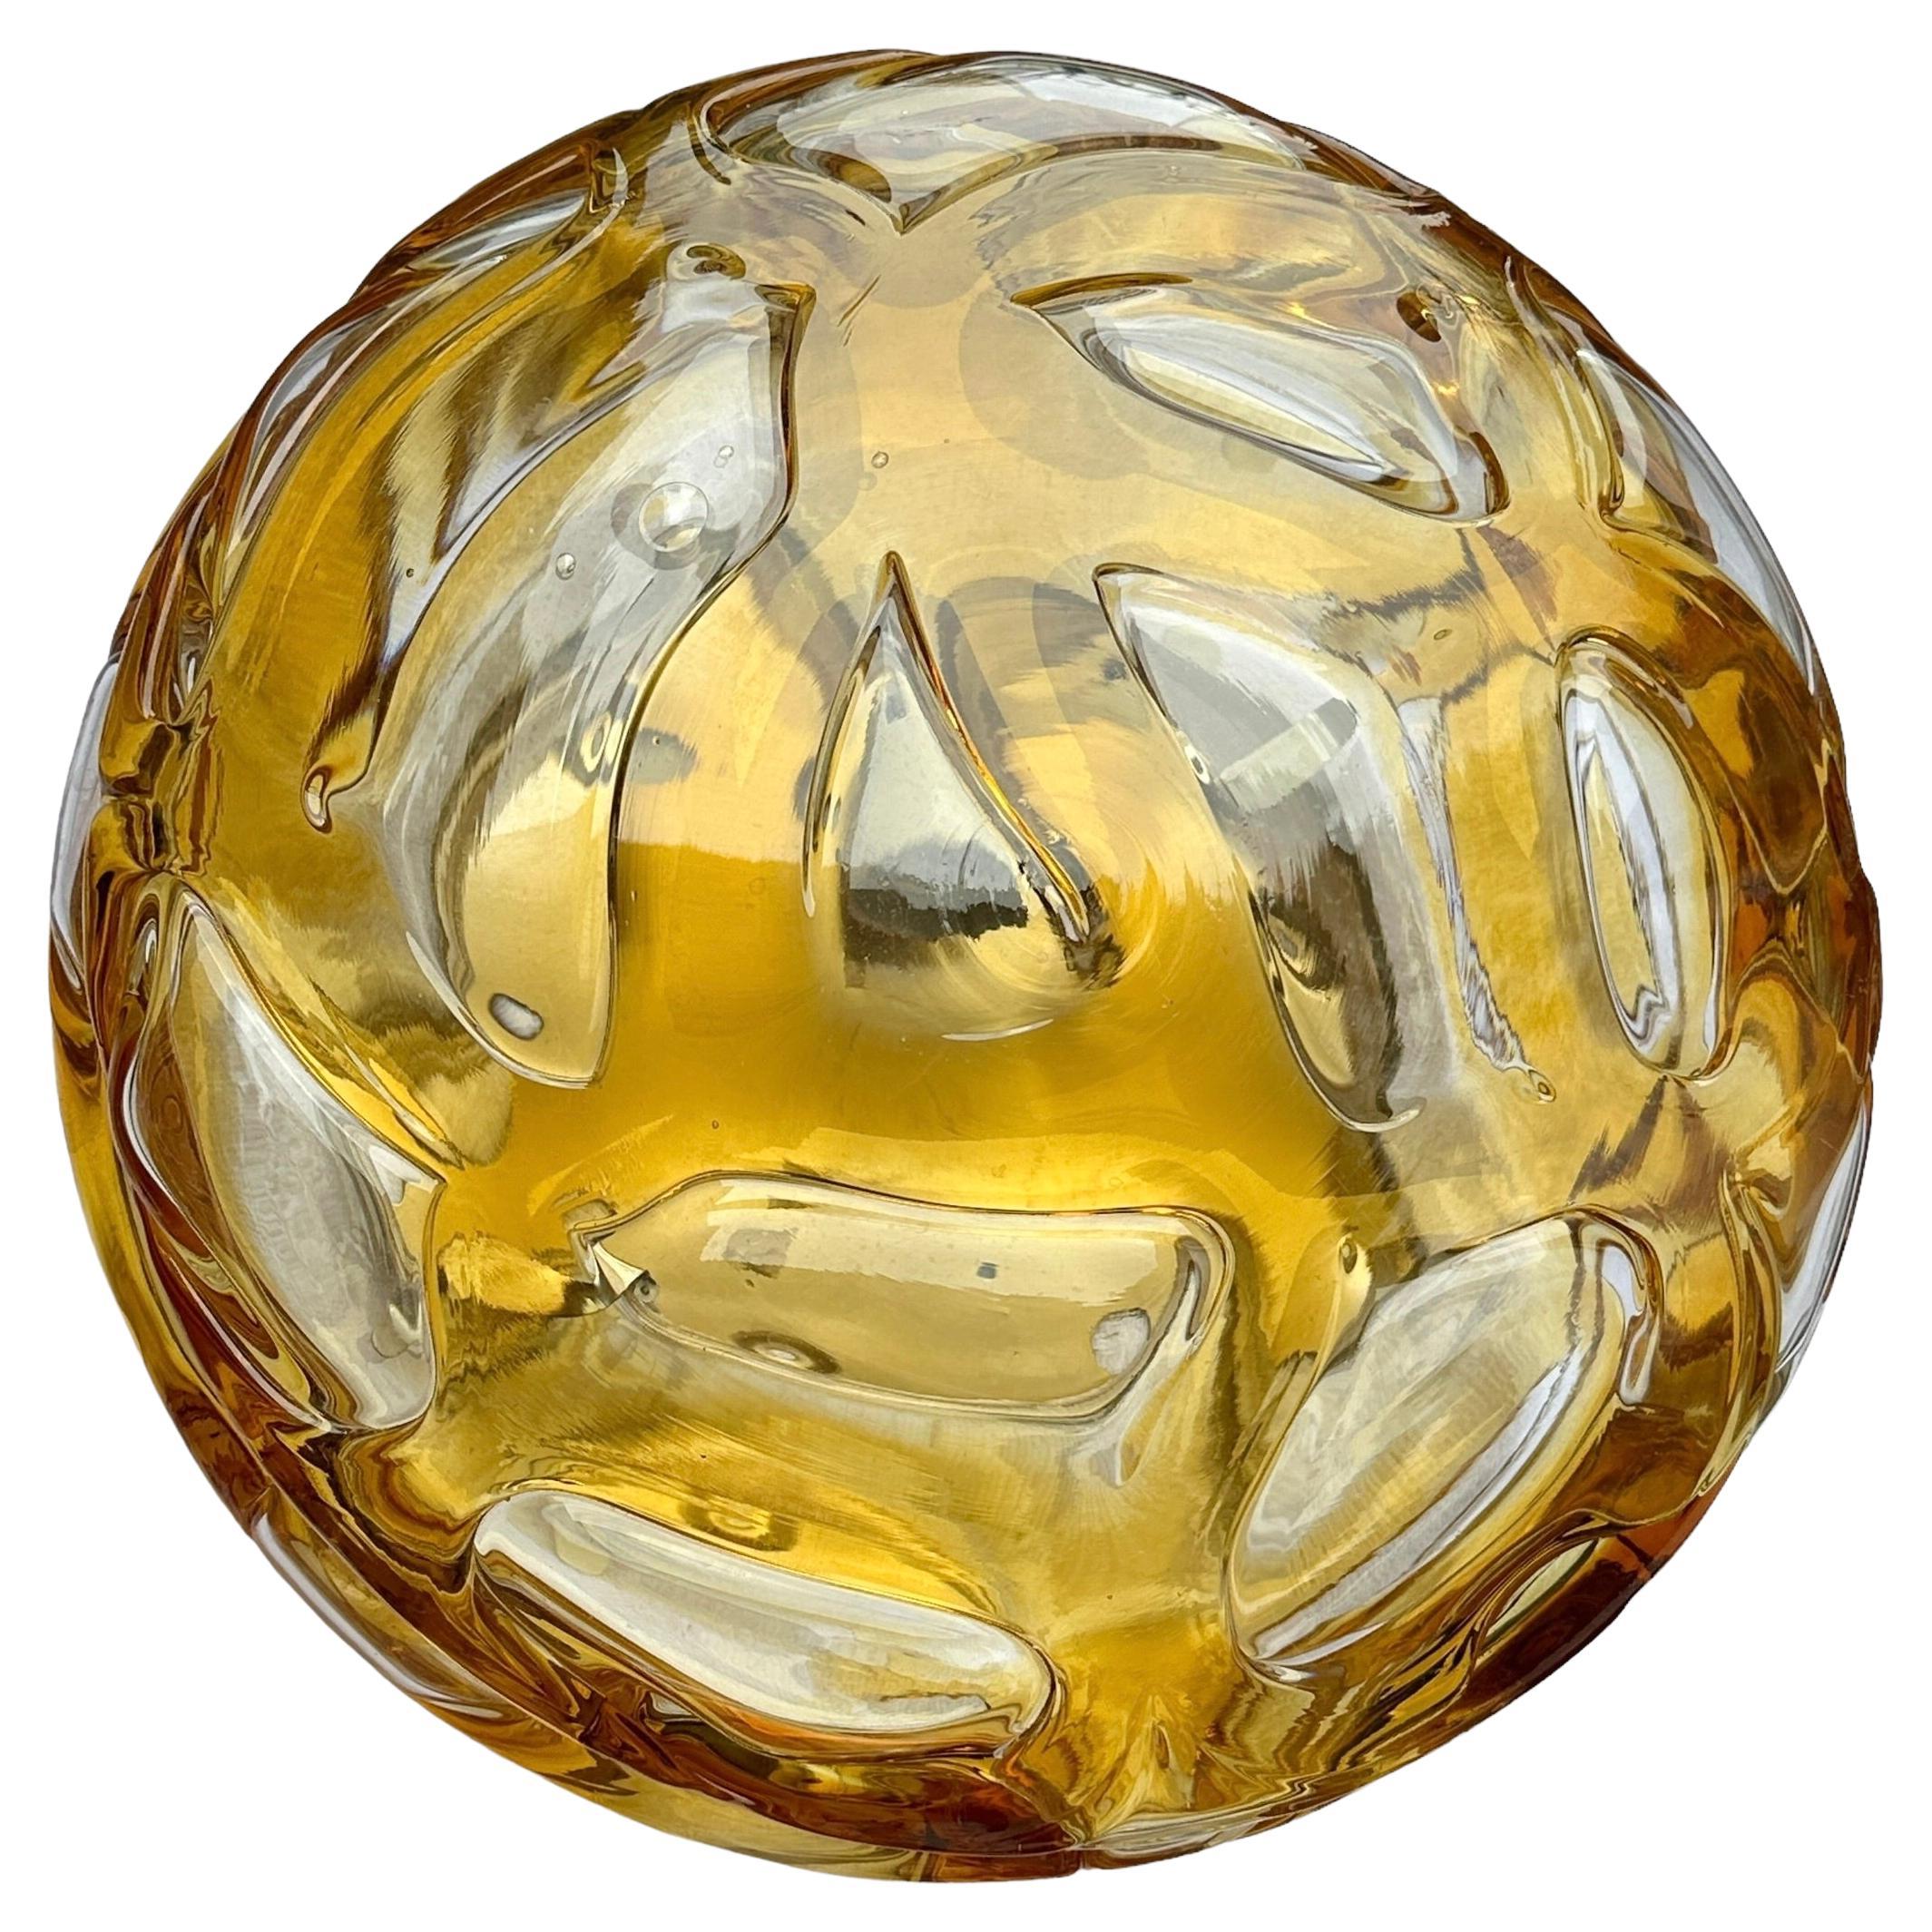 Beautiful Amber & Clear Glass Flush Mount by Doria Leuchten, Germany, 1960s